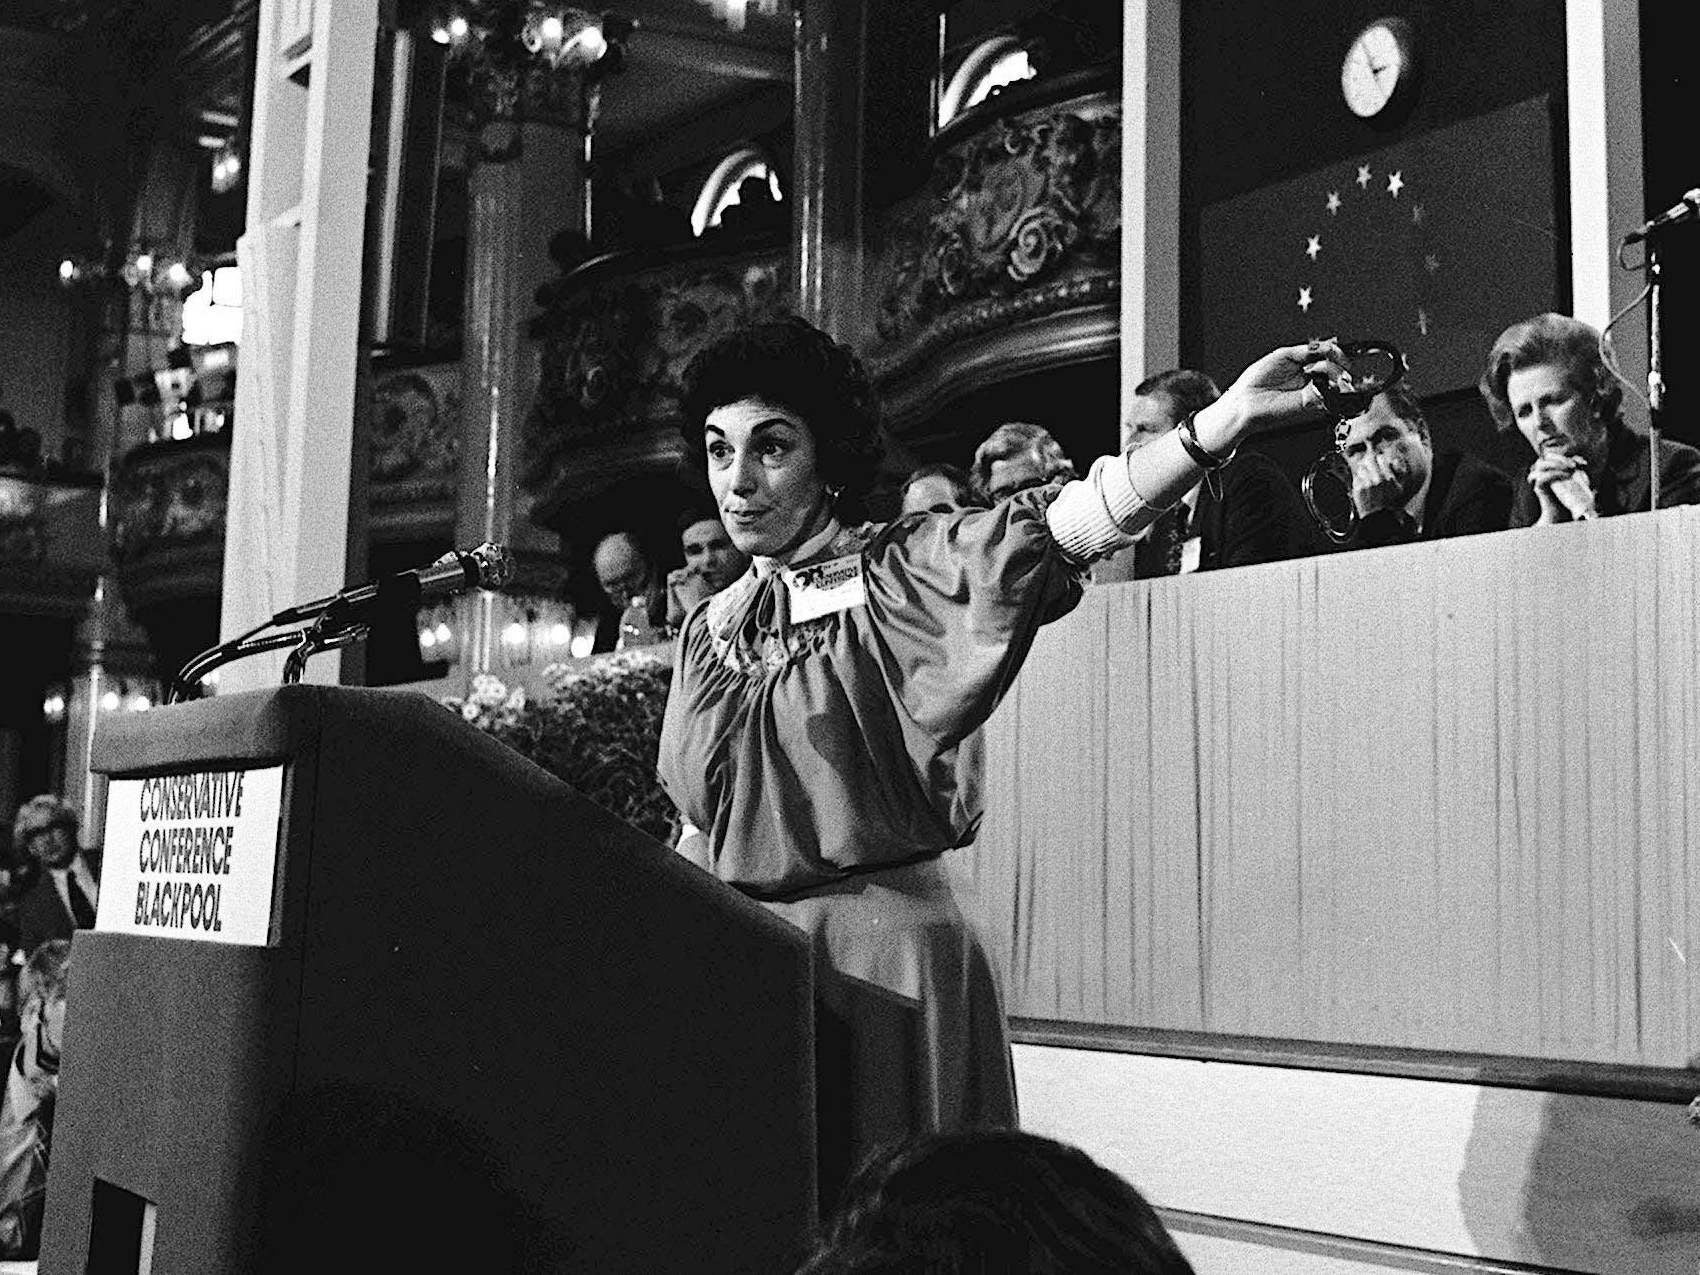 Edwina Currie brandishes a pair of handcuffs during the law and order debate at the Conservative Party Conference in 1981